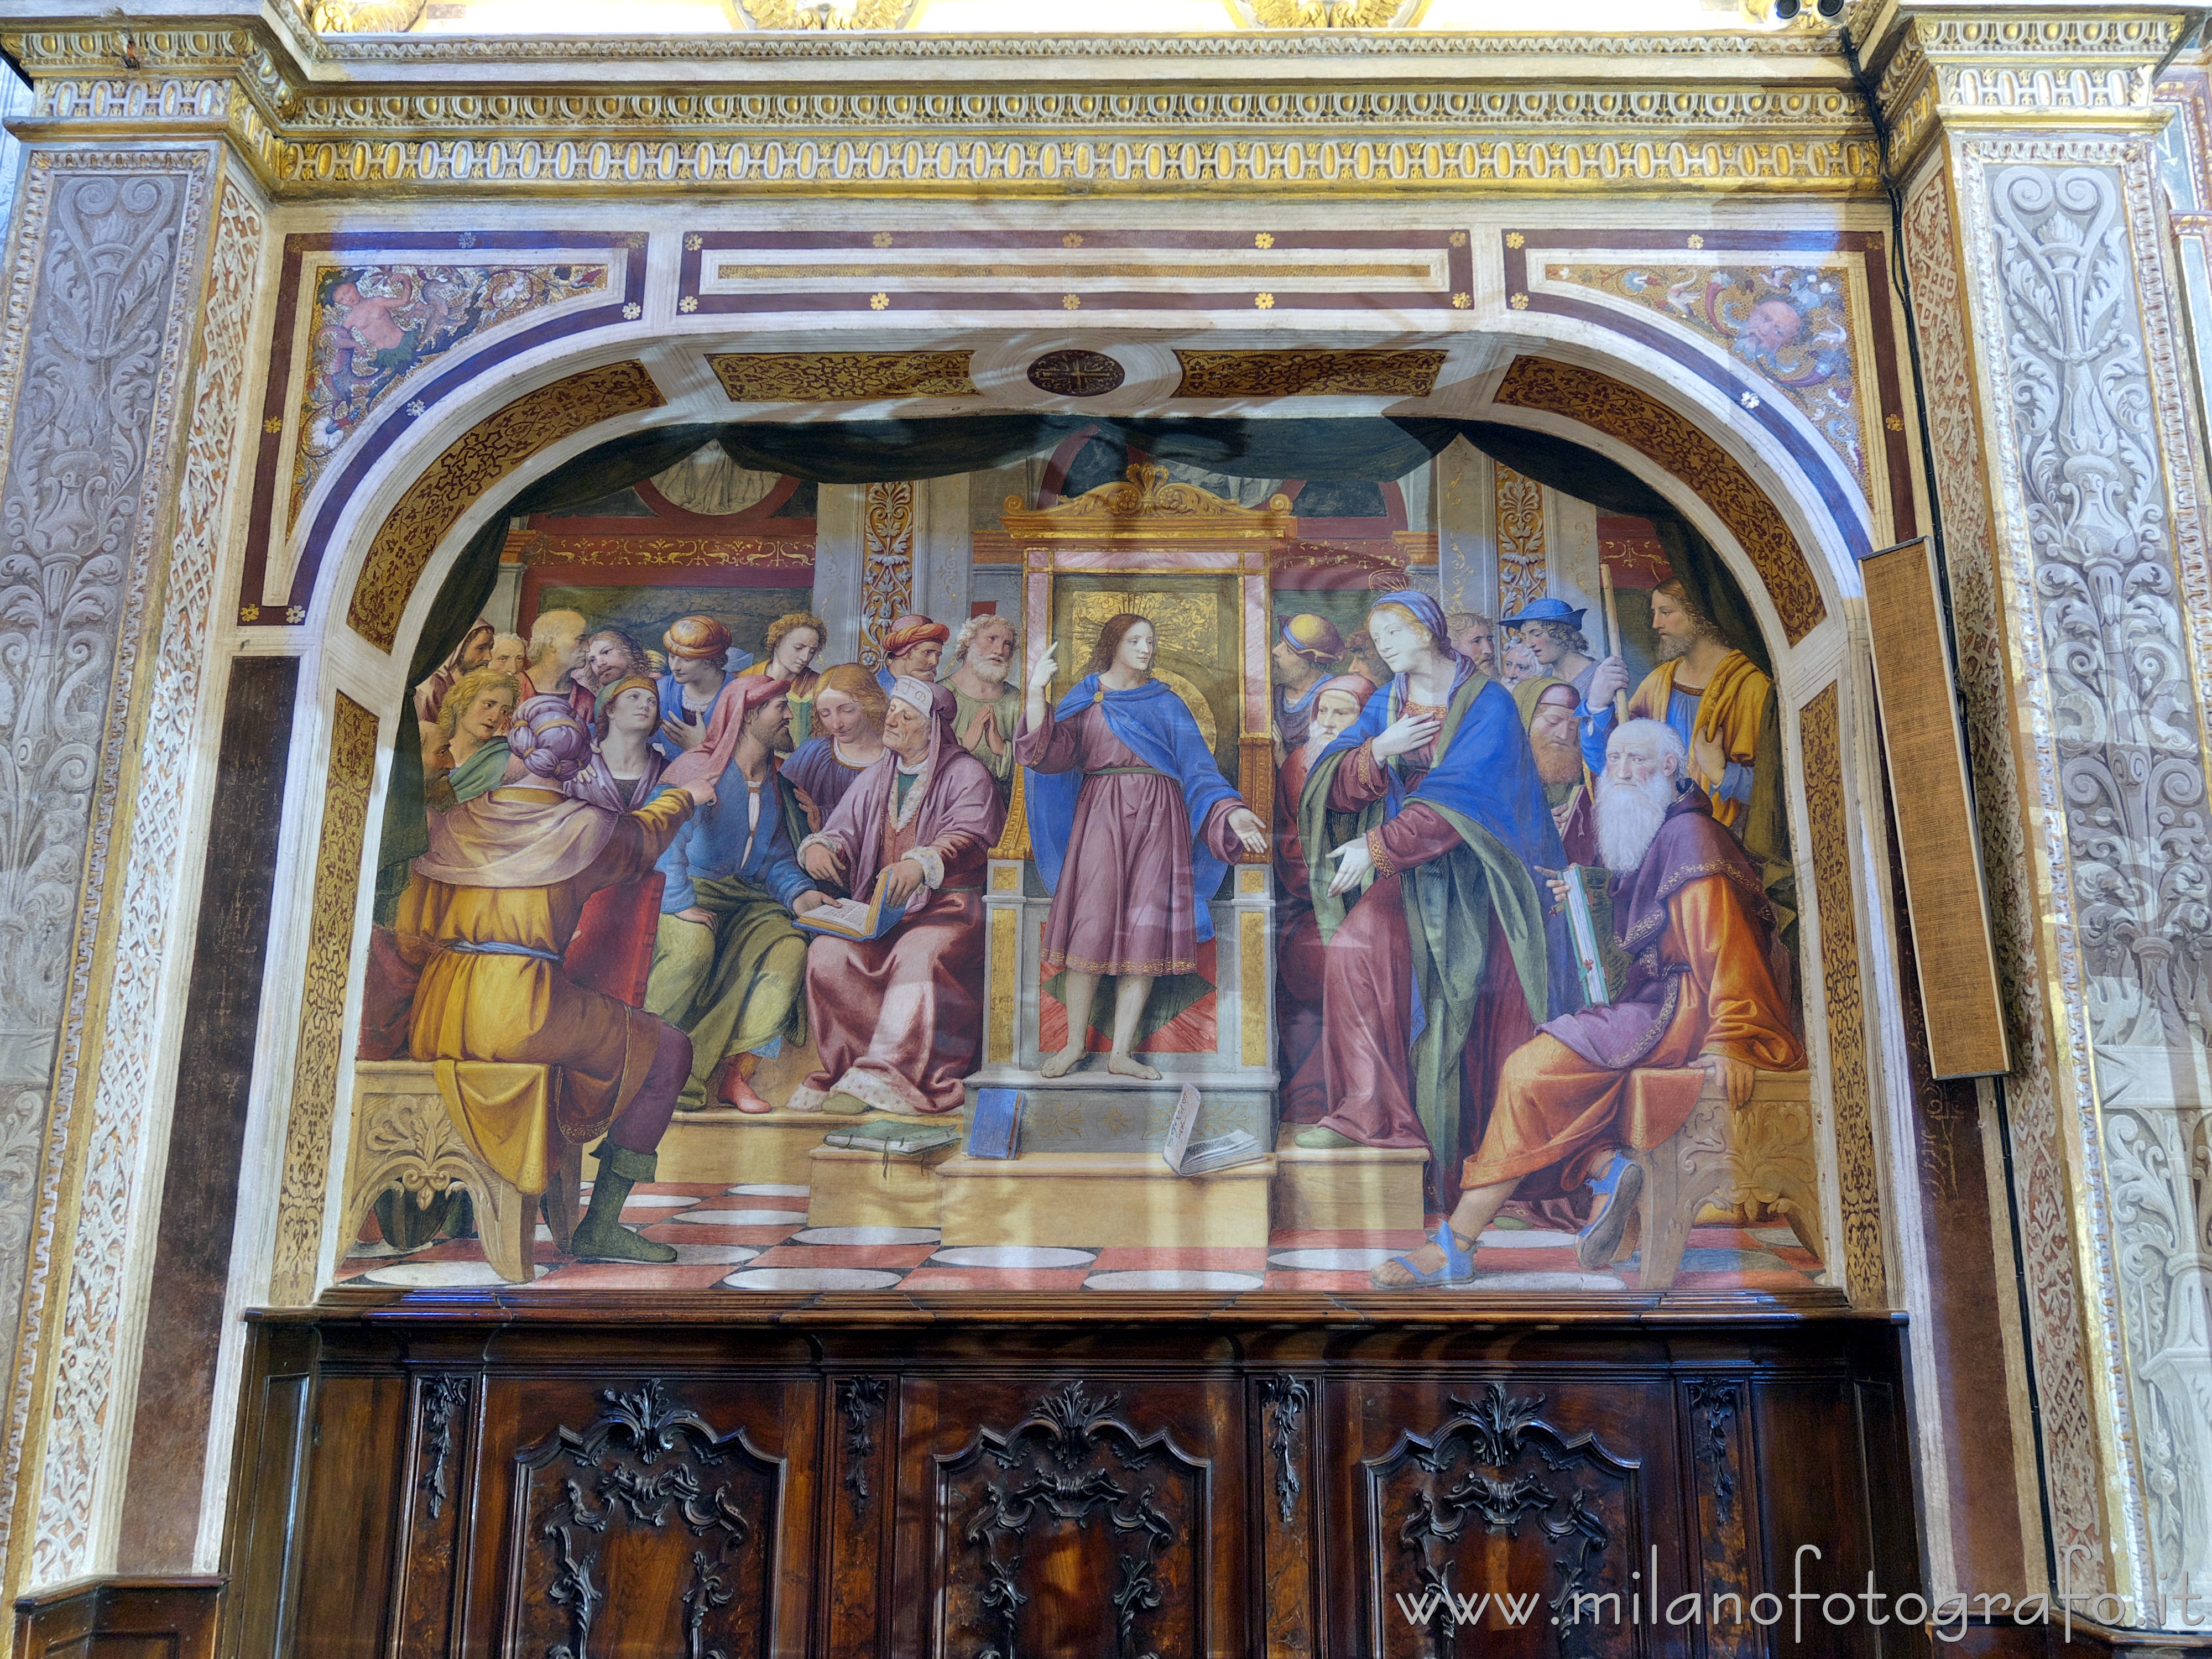 Saronno (Varese, Italy): Dispute with the Doctors inside the Sanctuary of Saronno - Saronno (Varese, Italy)